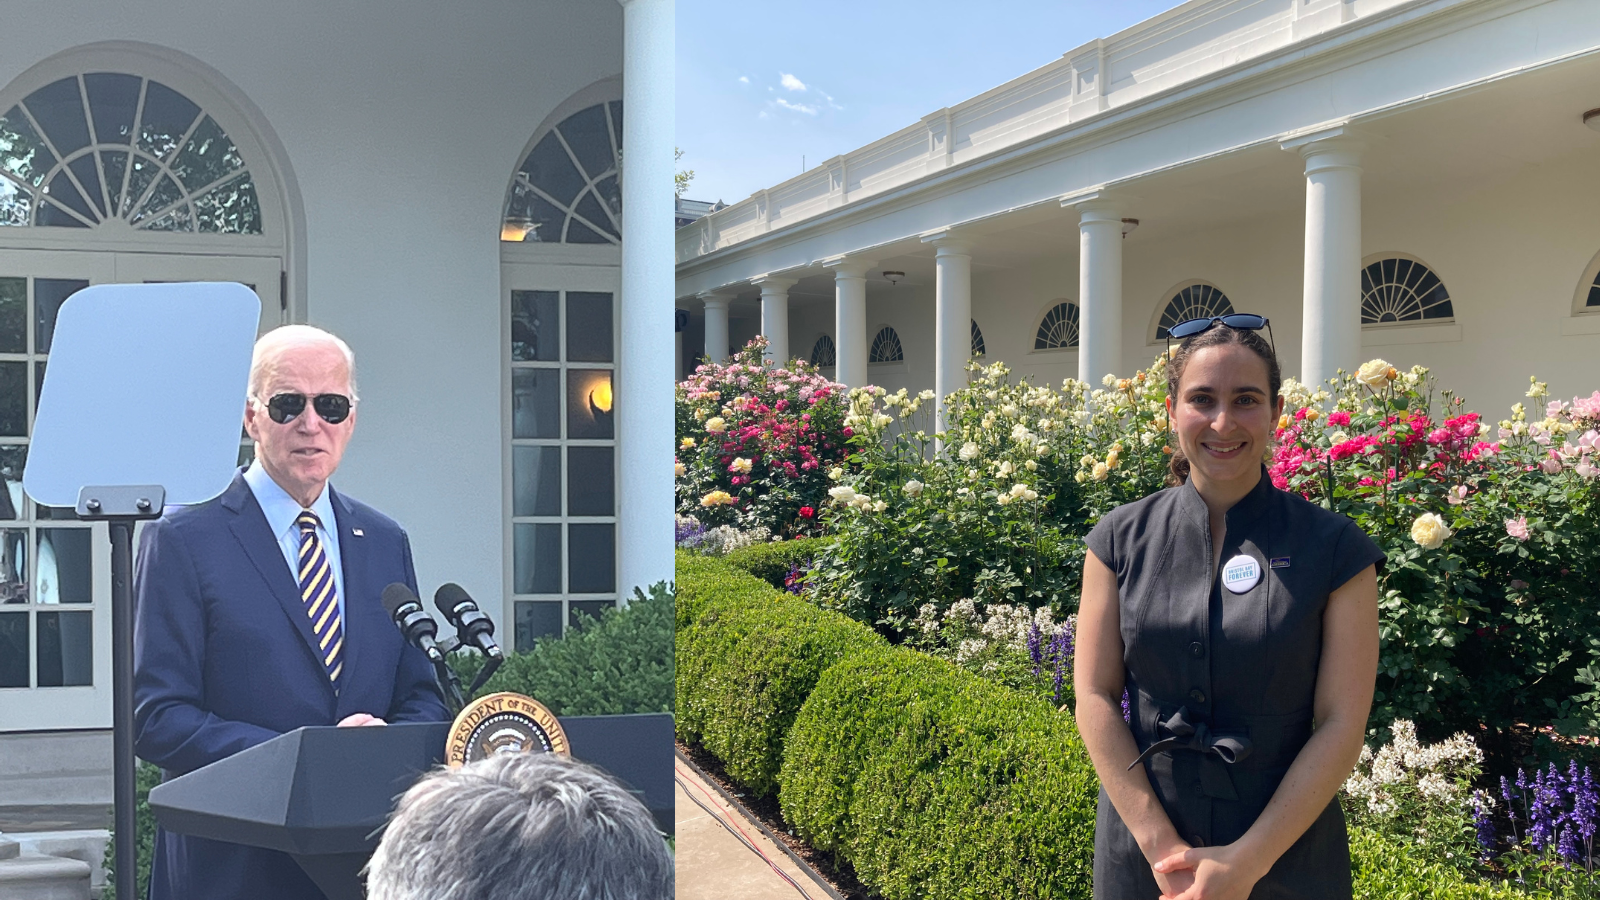 A photo of President Joe Biden speaking about protecting Bristol Bay and stopping the Pebble Mine next to a photo of Environment America's Lisa Frank in the Rose Garden at the celebration.